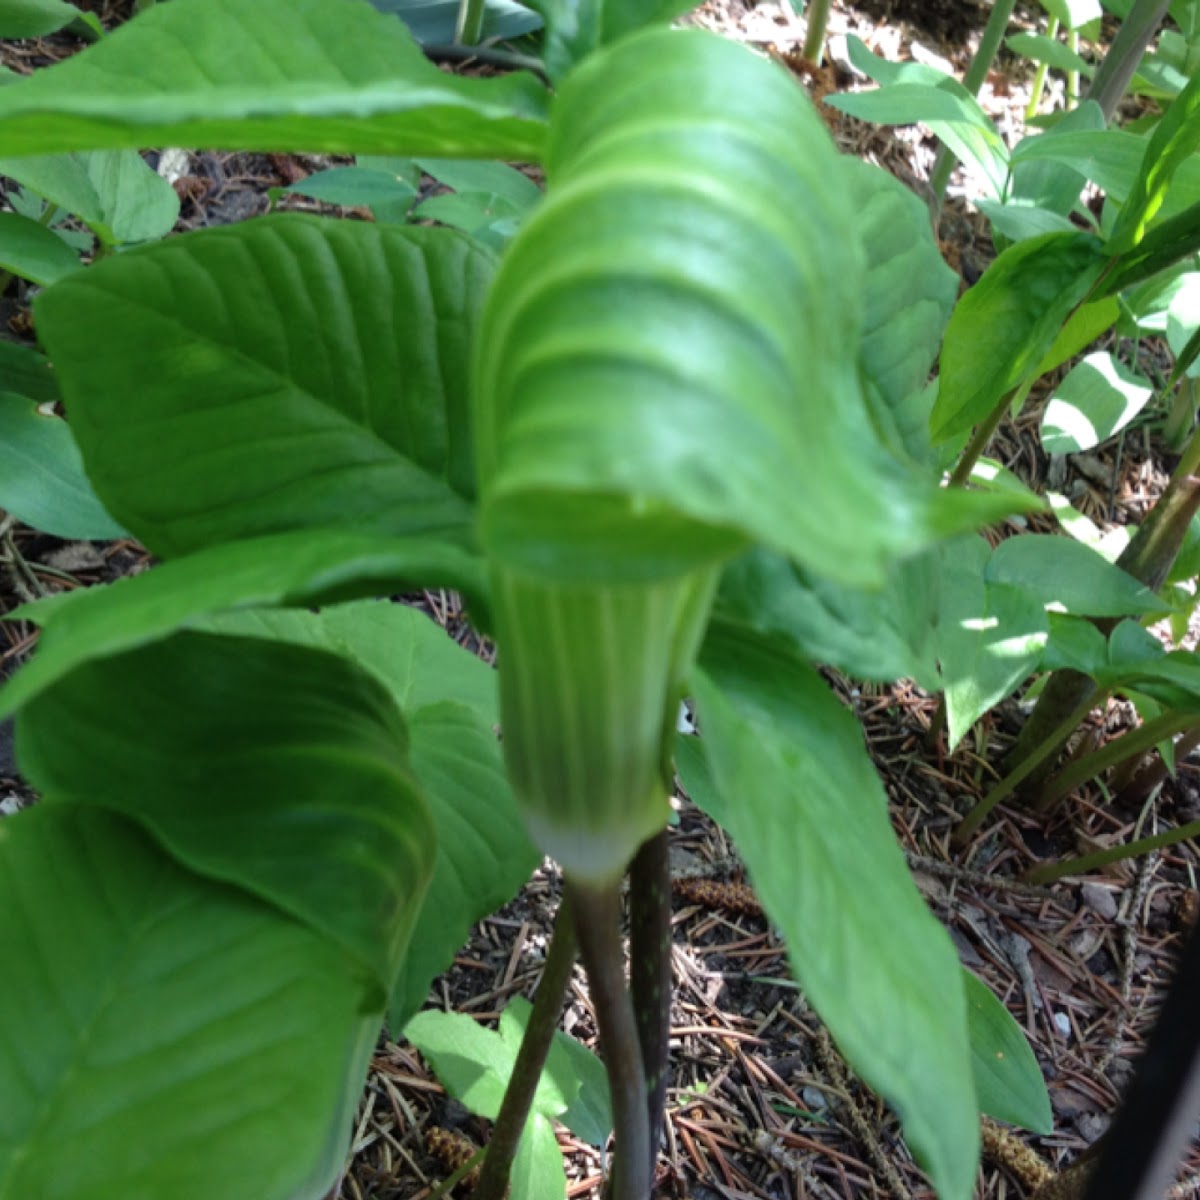 Jack-in-the-pulpit